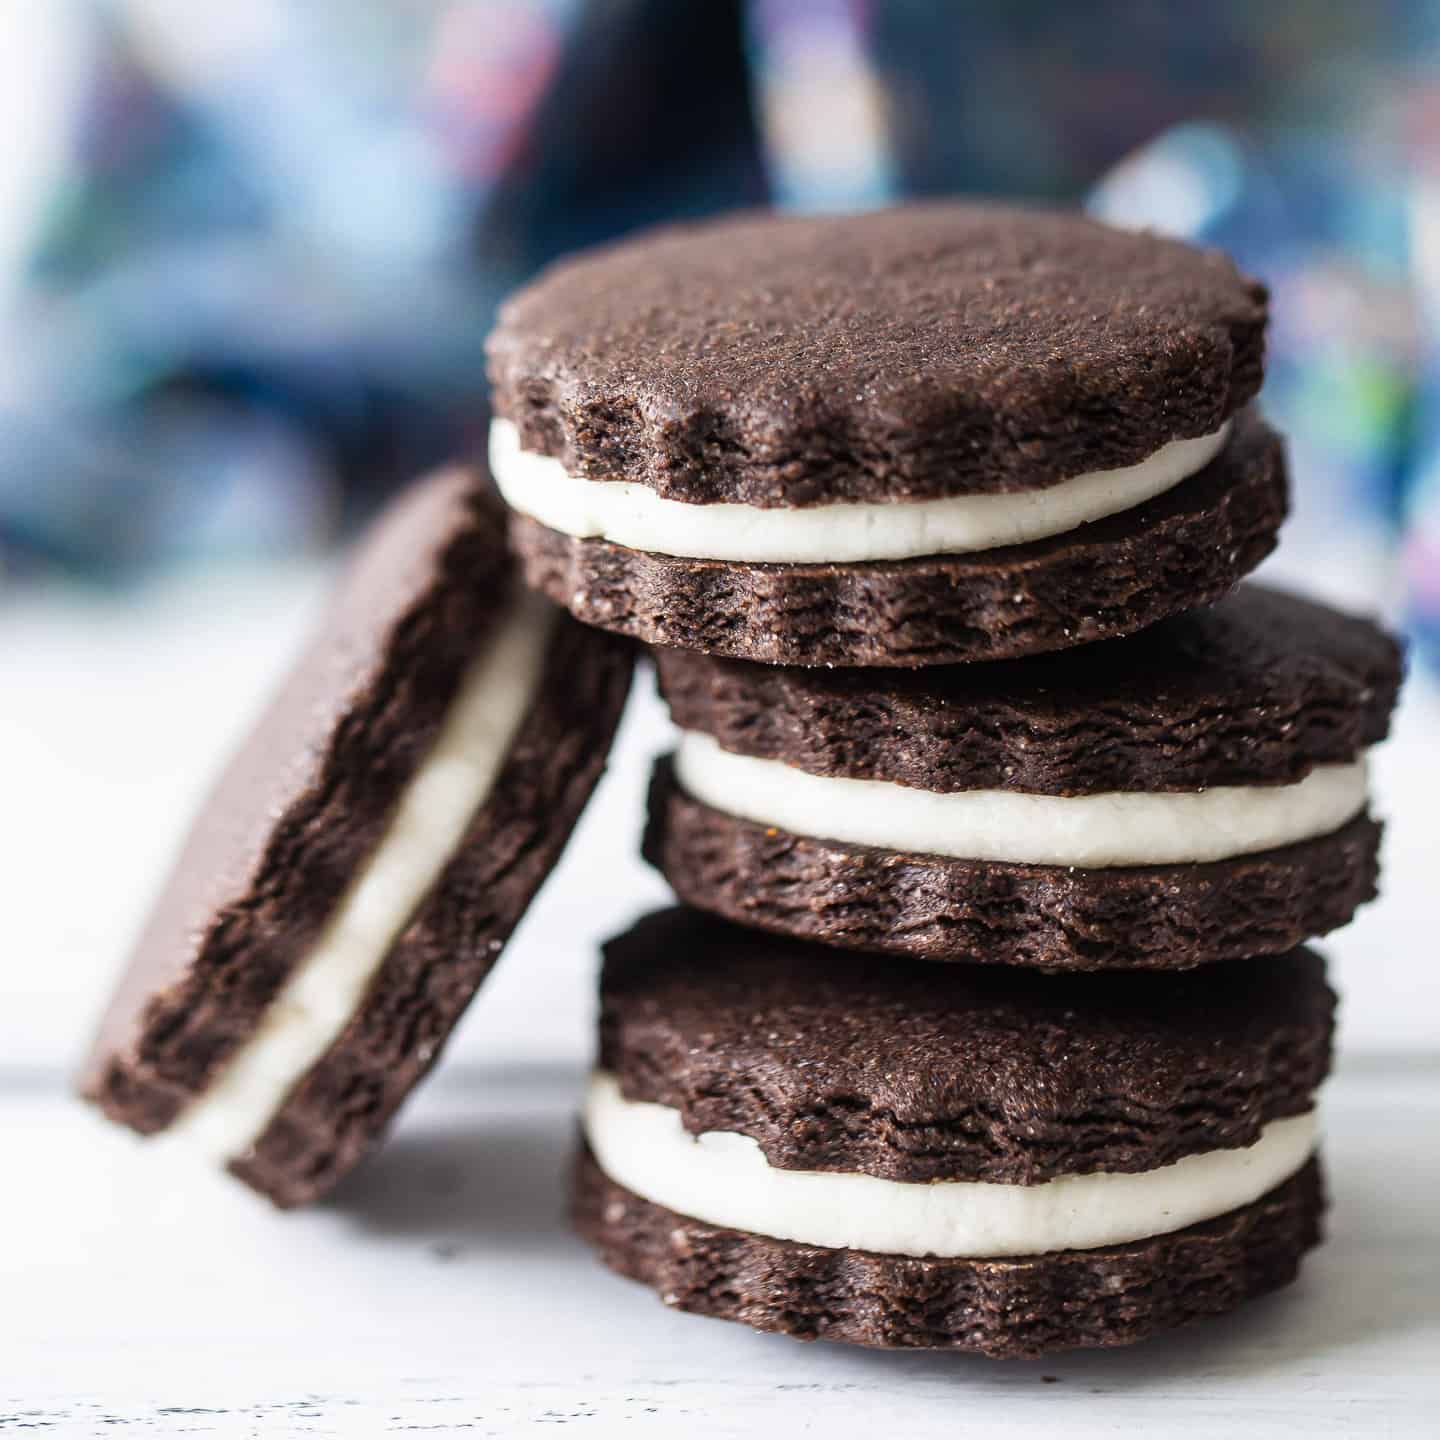 Oreo's Newest Cookie Is a Candy Bar - Eater